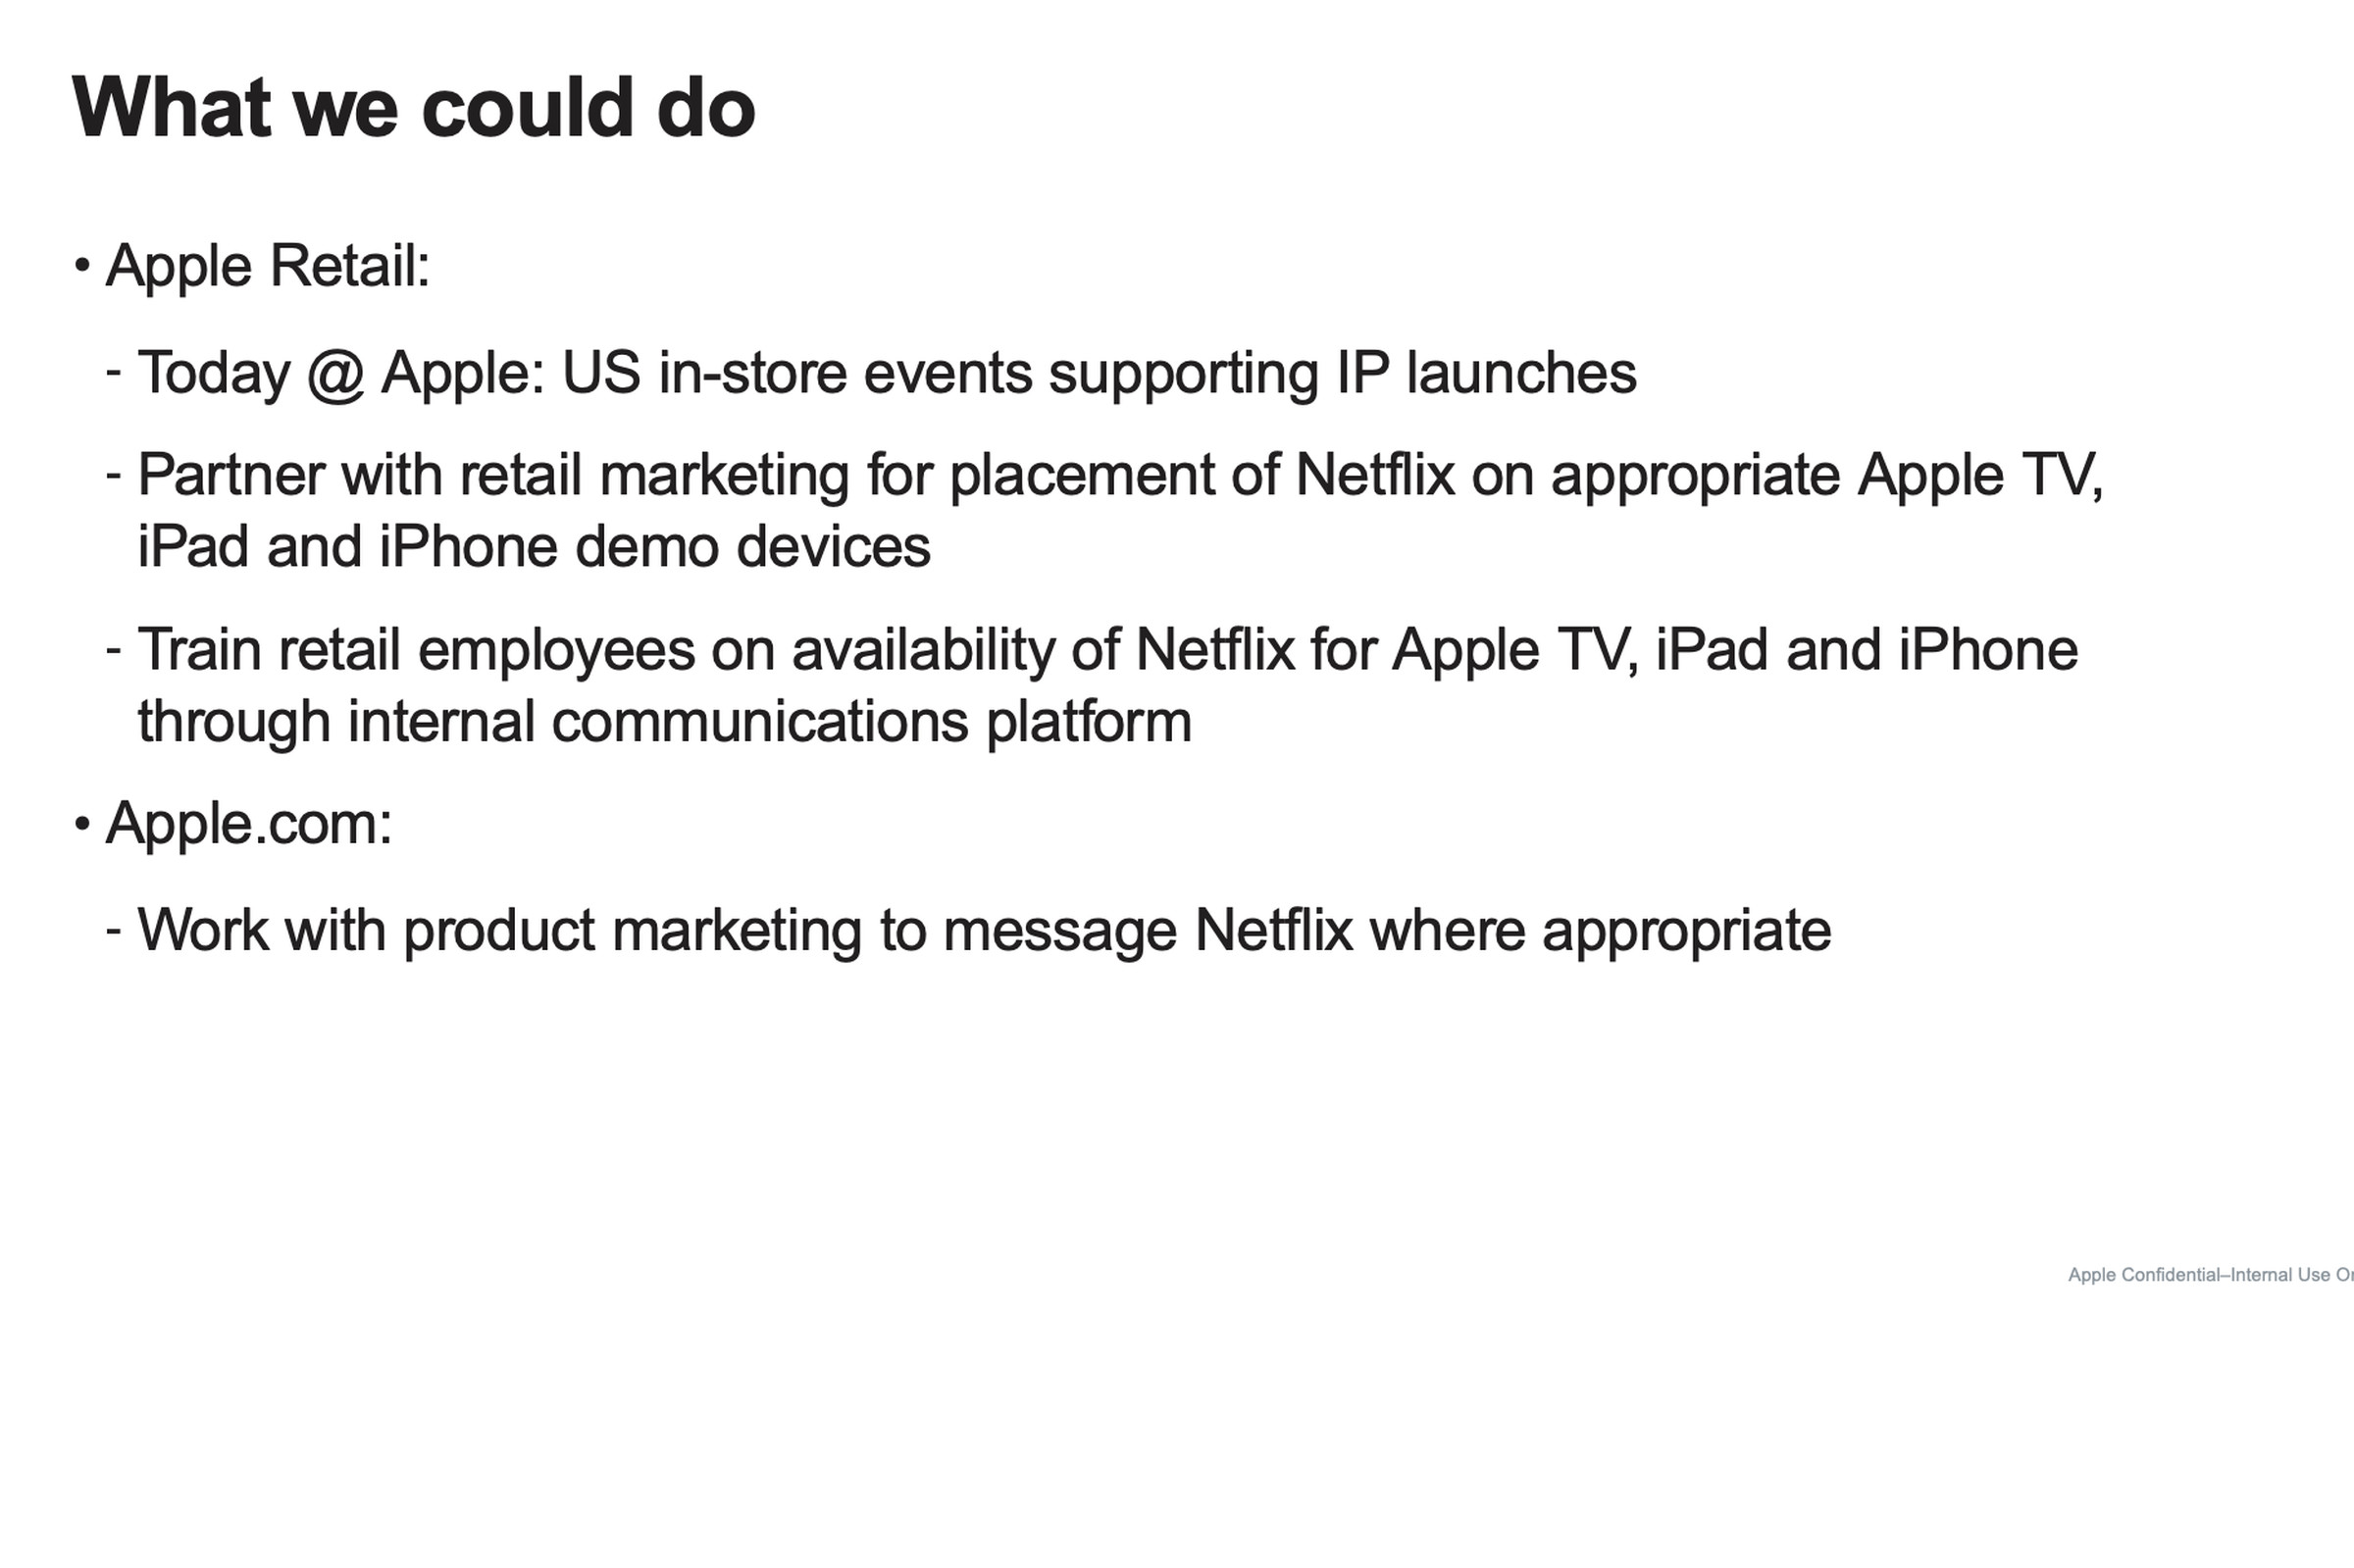 Apple also looked at advertising Netflix in its retail stores.